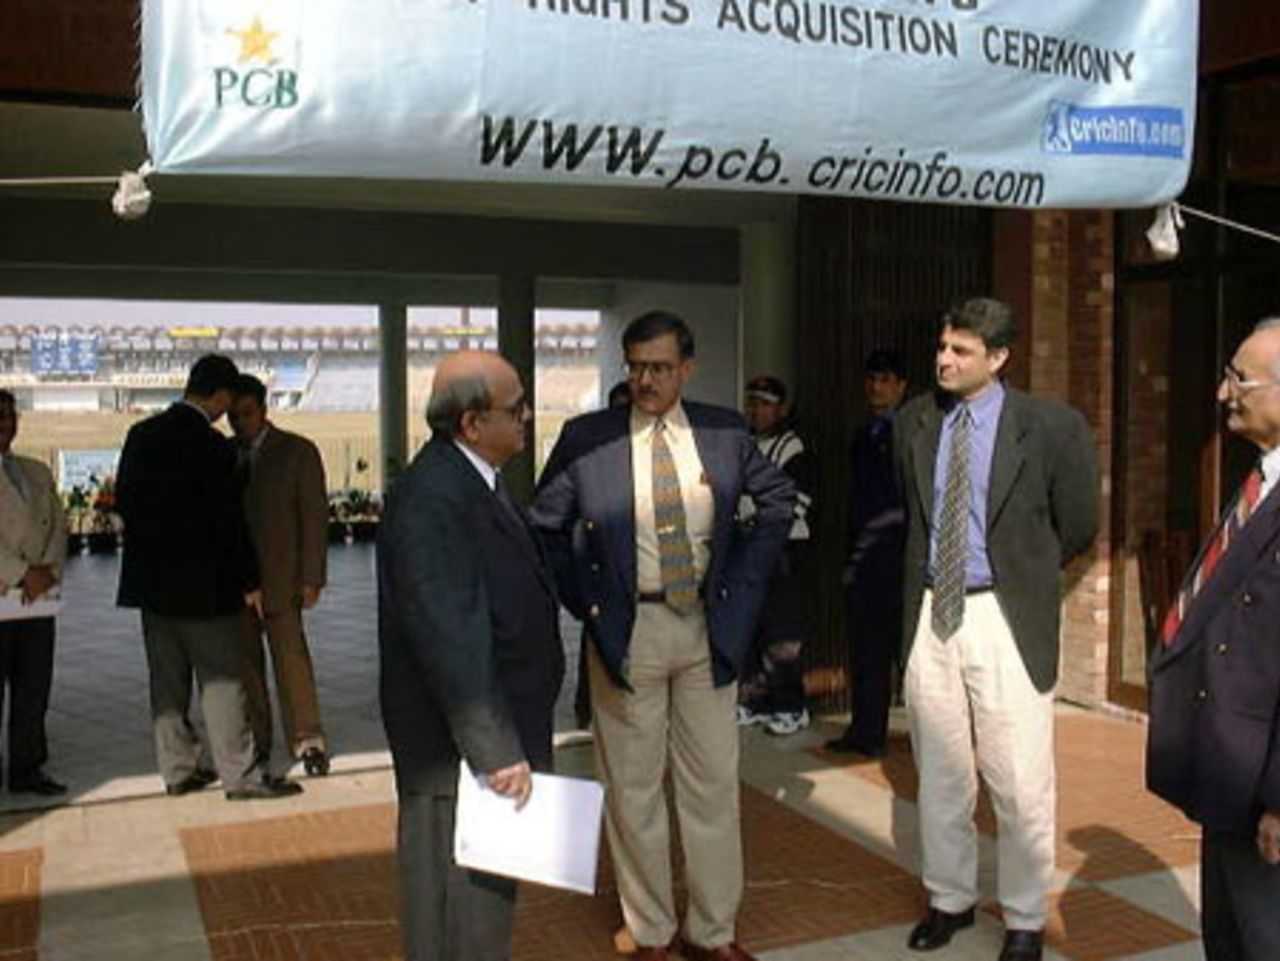 Brig Munawar A Rana Director PCB, Zakir Khan GM Cricket Operations PCB, Col (R) Rafi Nasim and Suhael Ahmed of CI-Pakistan in discussion at PCB - CricInfo Internet Rights Acquisition Ceremony at Gaddafi Stadium, Lahore 5 Feb 2001